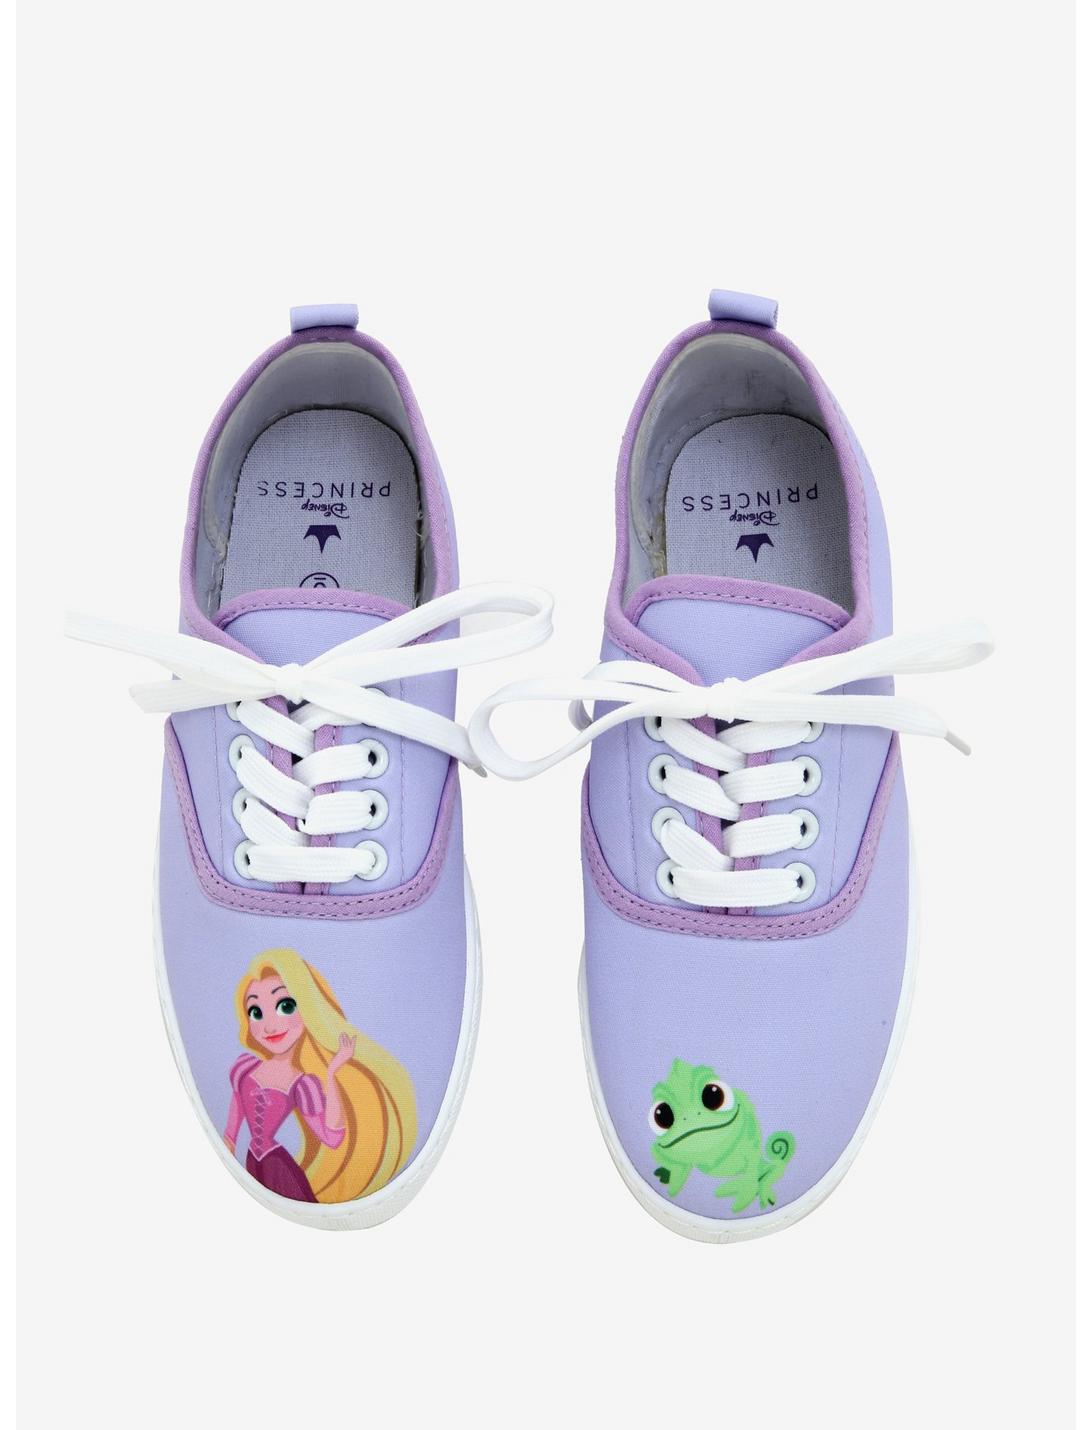 Disney Tangled Rapunzel & Pascal Lace-Up Sneakers, MULTI, hi-res